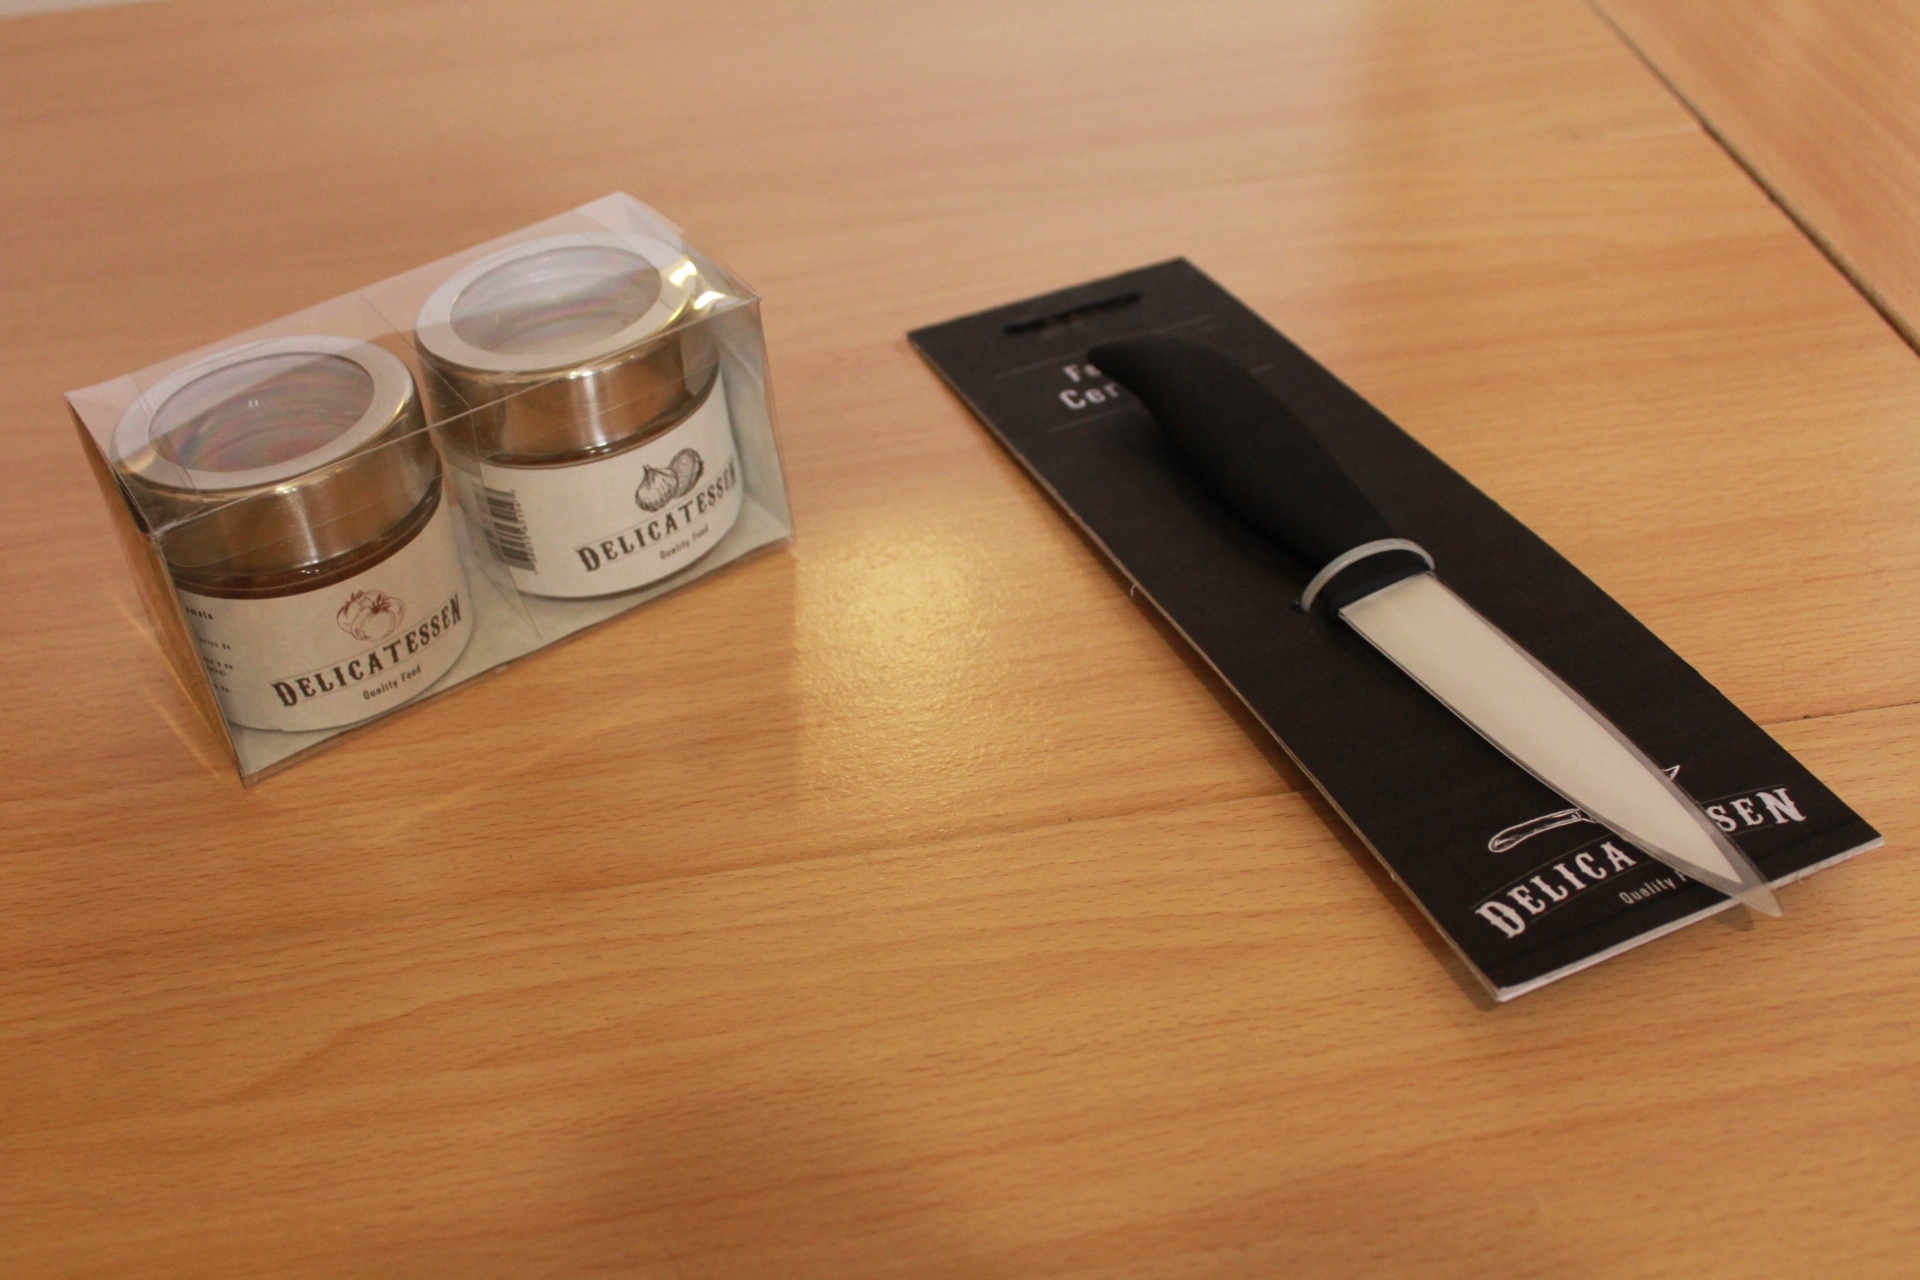 Delicatessen brand knife and packaging